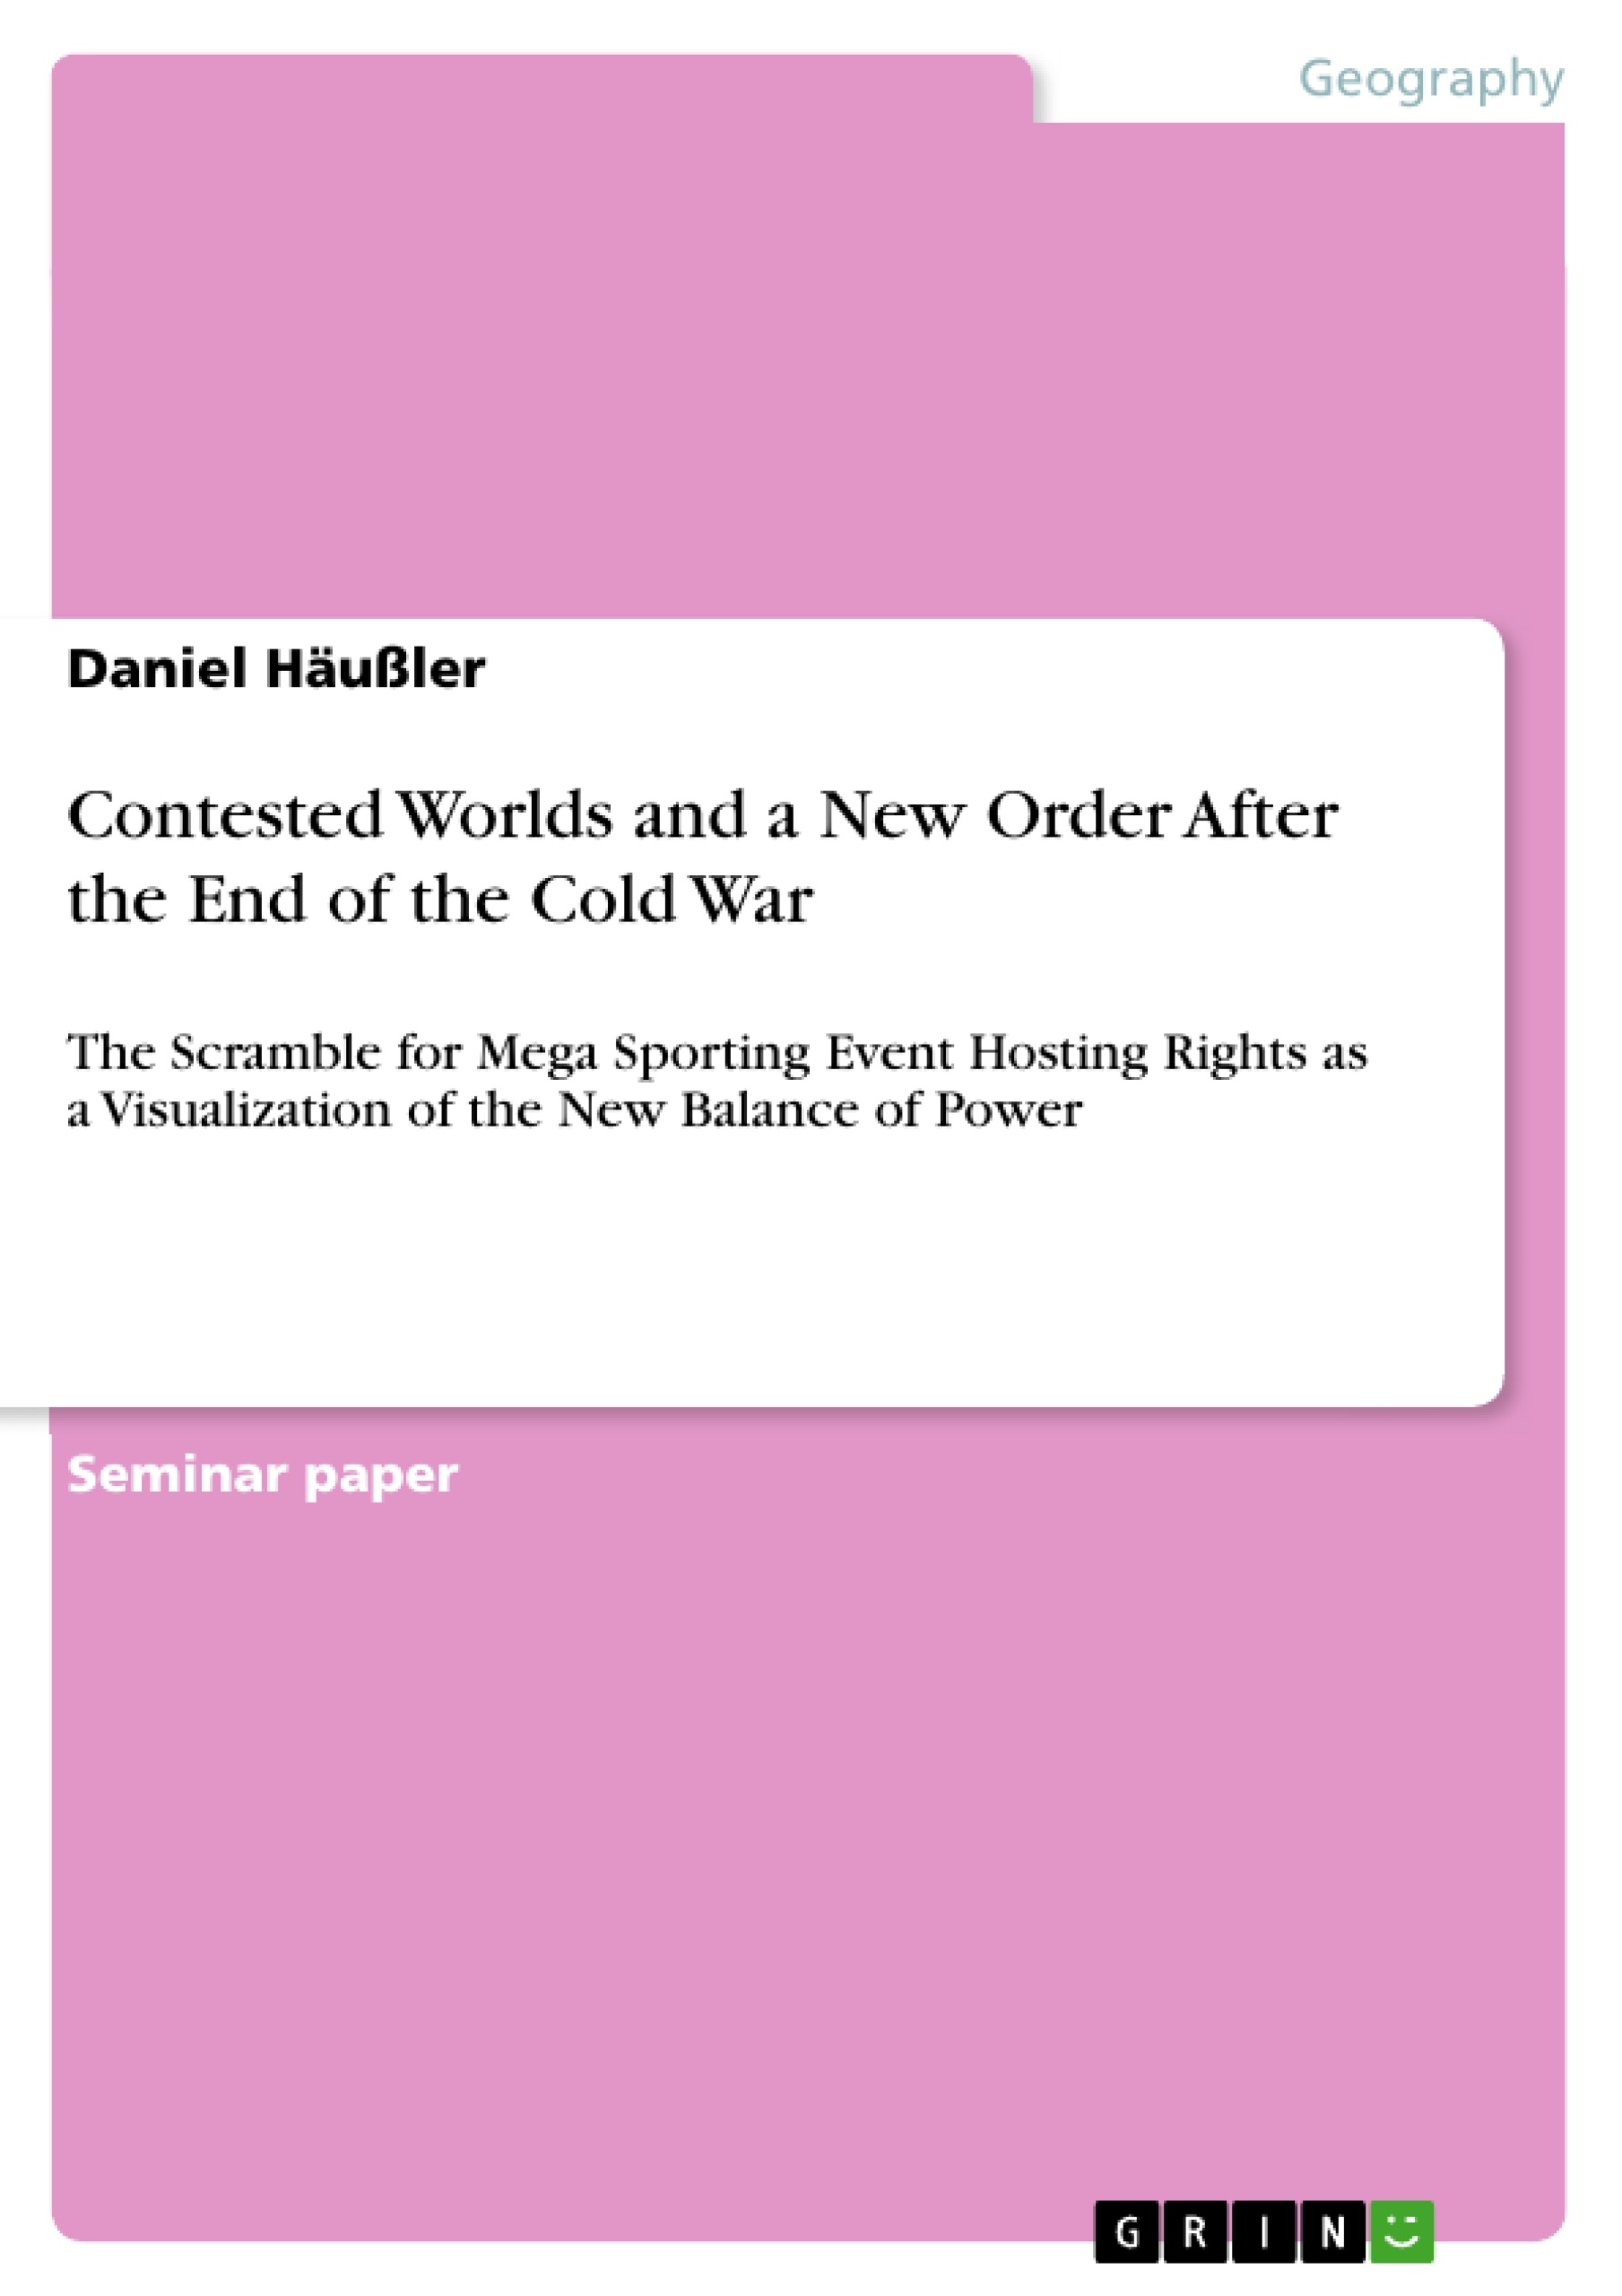 Title: Contested Worlds and a New Order After the End of the Cold War